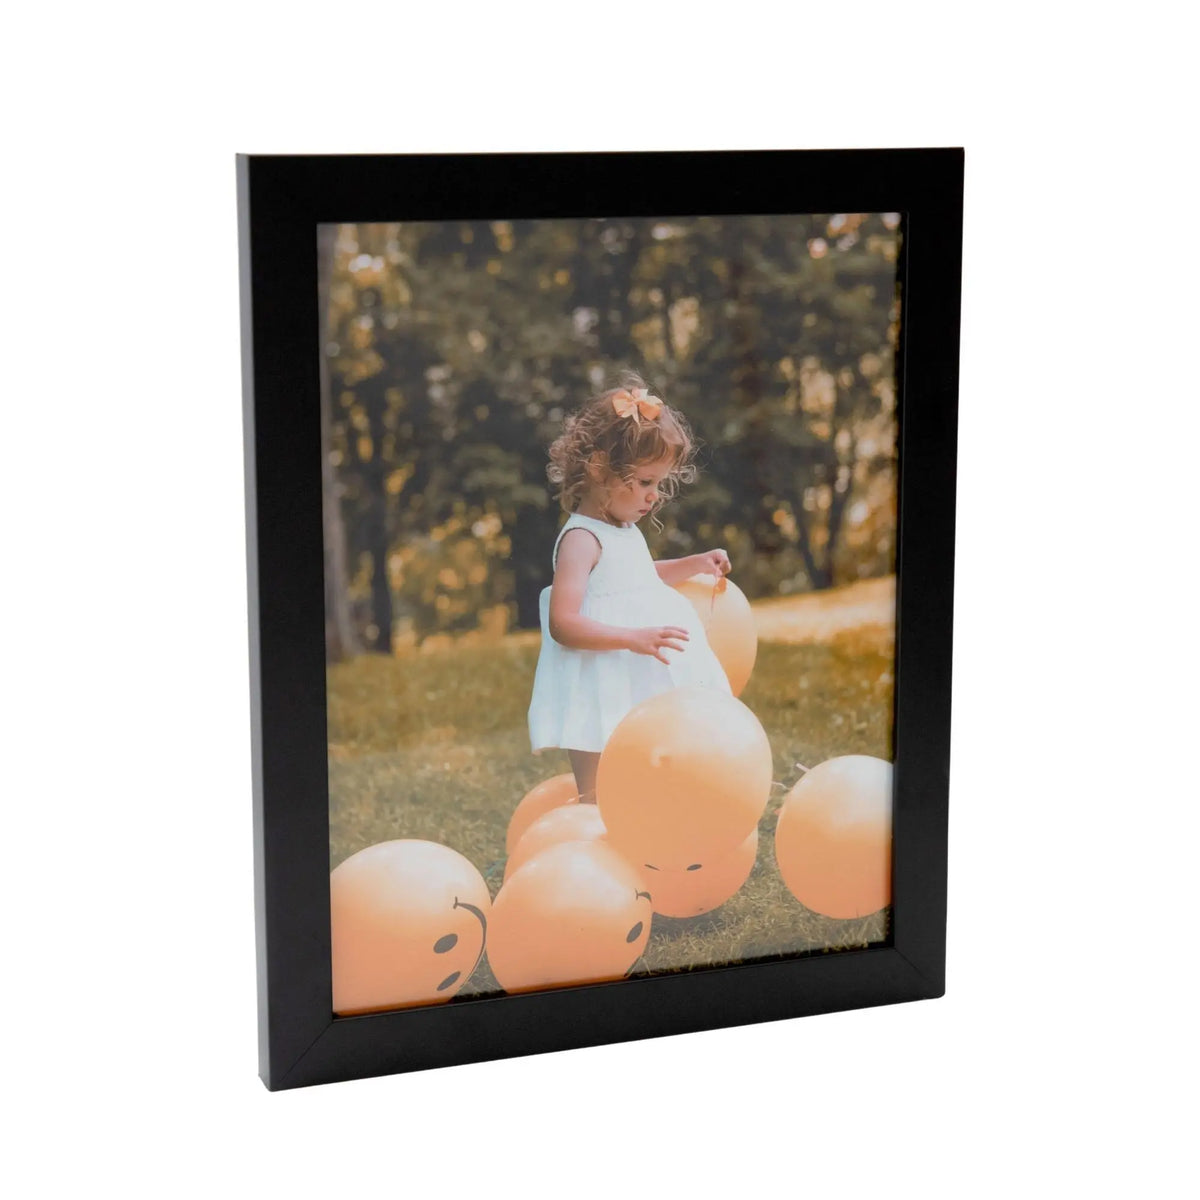 Large Photo Picture Frame 36 x 48 Oversize Complete Assembly Required